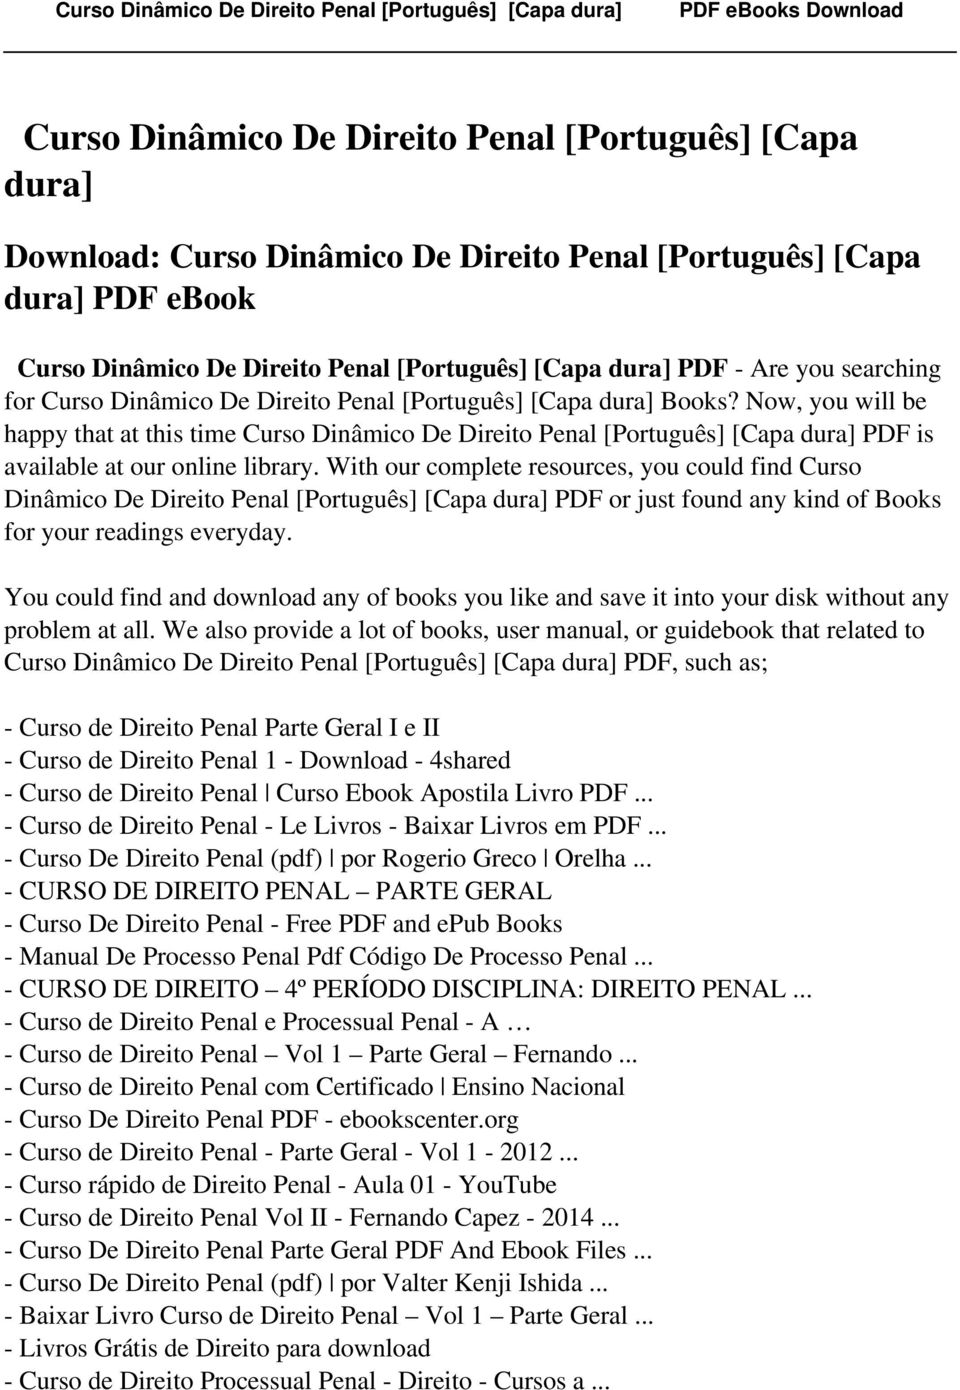 Now, you will be happy that at this time Curso Dinâmico De Direito Penal [Português] [Capa dura] PDF is available at our online library.